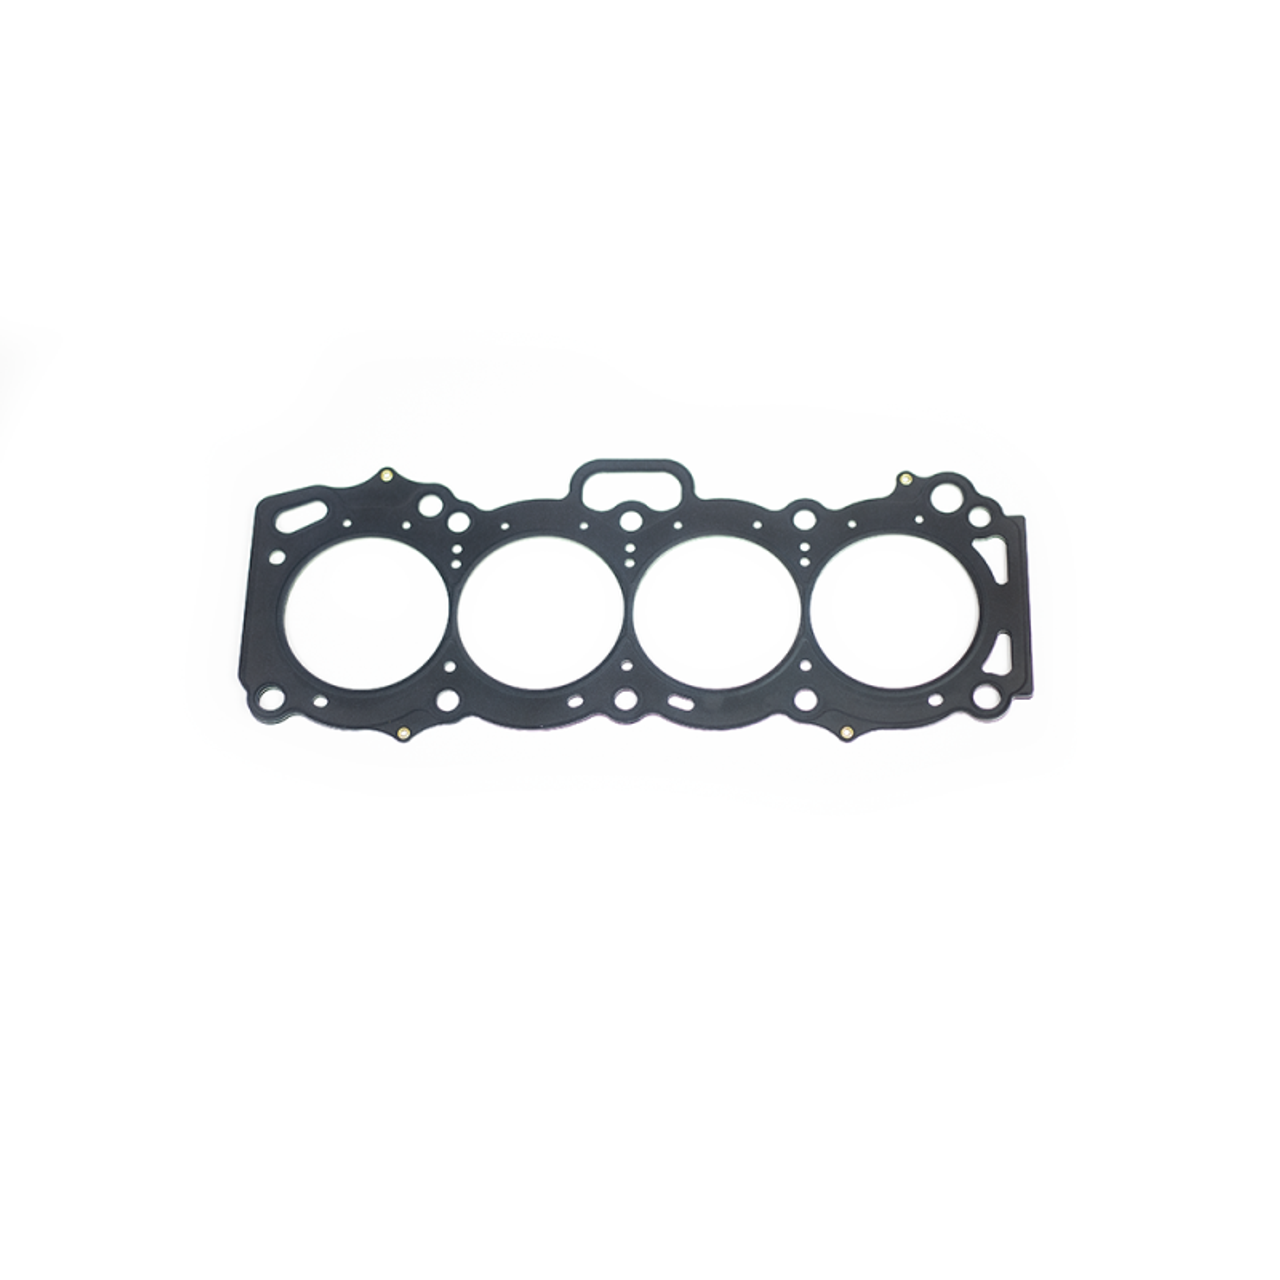 Supertech Toyota 4AGE 83mm Dia 1.3mm Thick MLS Head Gasket - HG-T4AGE-83-1.3T User 1